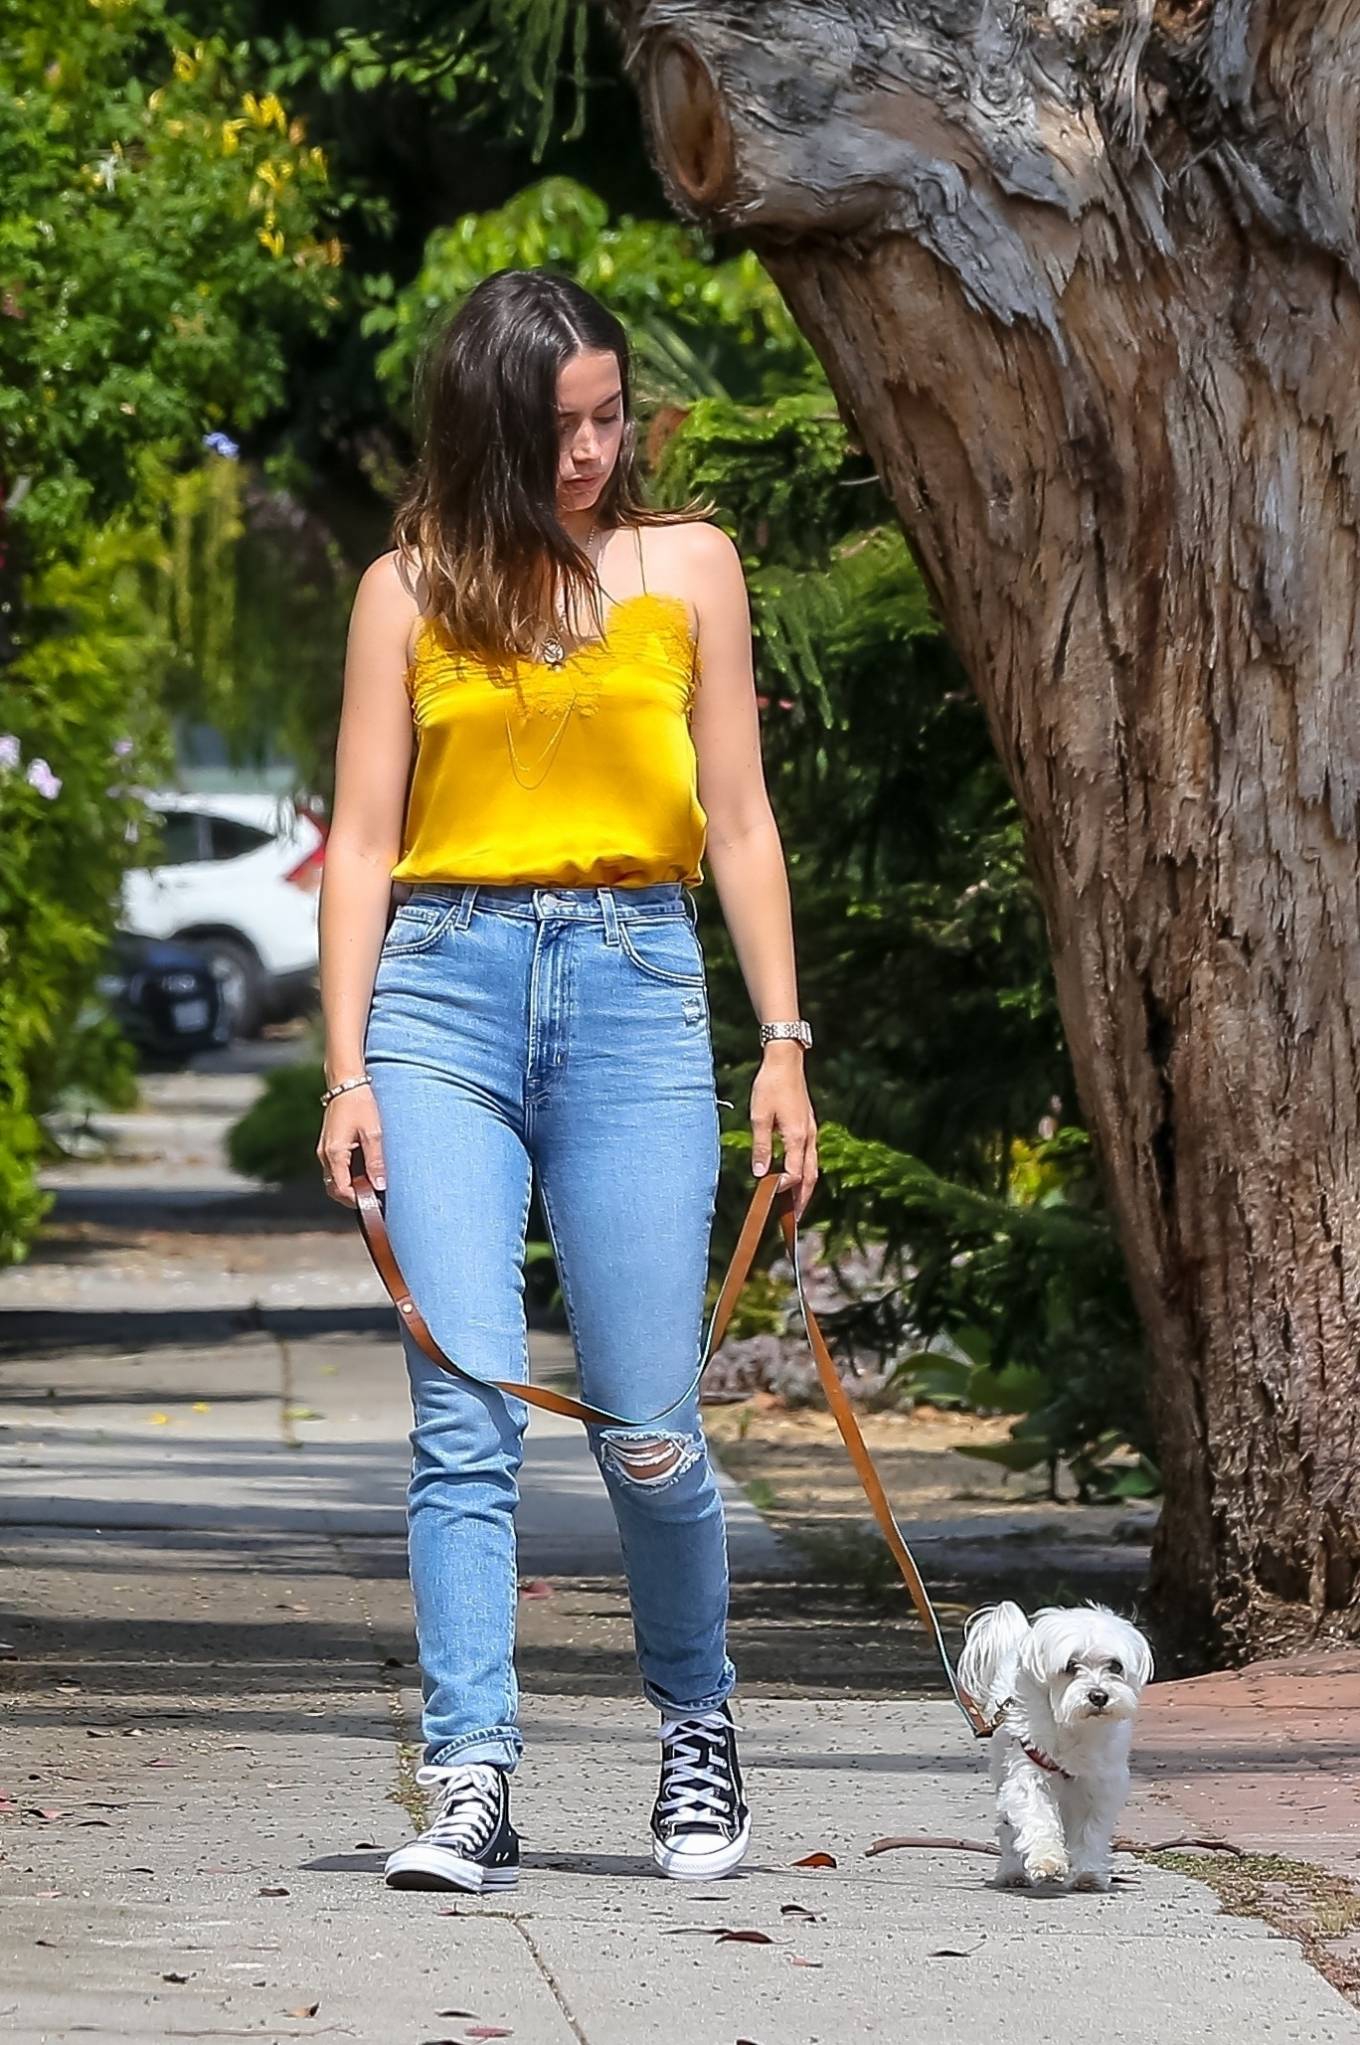 Ana De Armas in Yellow Top out with her dog in Venice-15 | GotCeleb